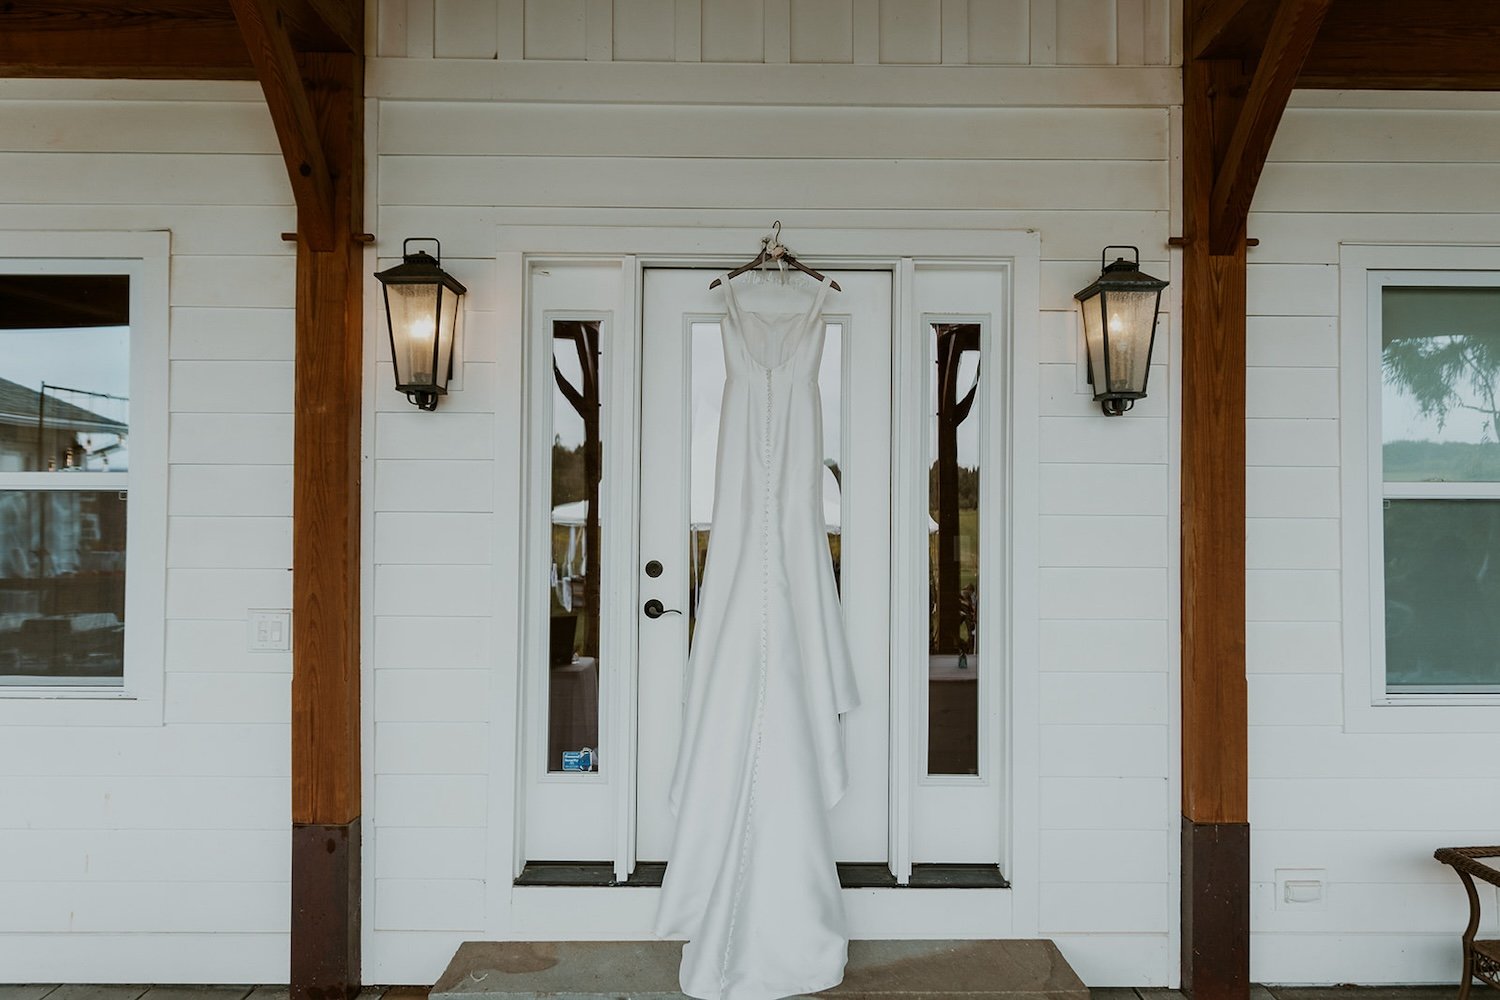 The brides beautiful wedding gown hanging on the front door of the Ithaca home.